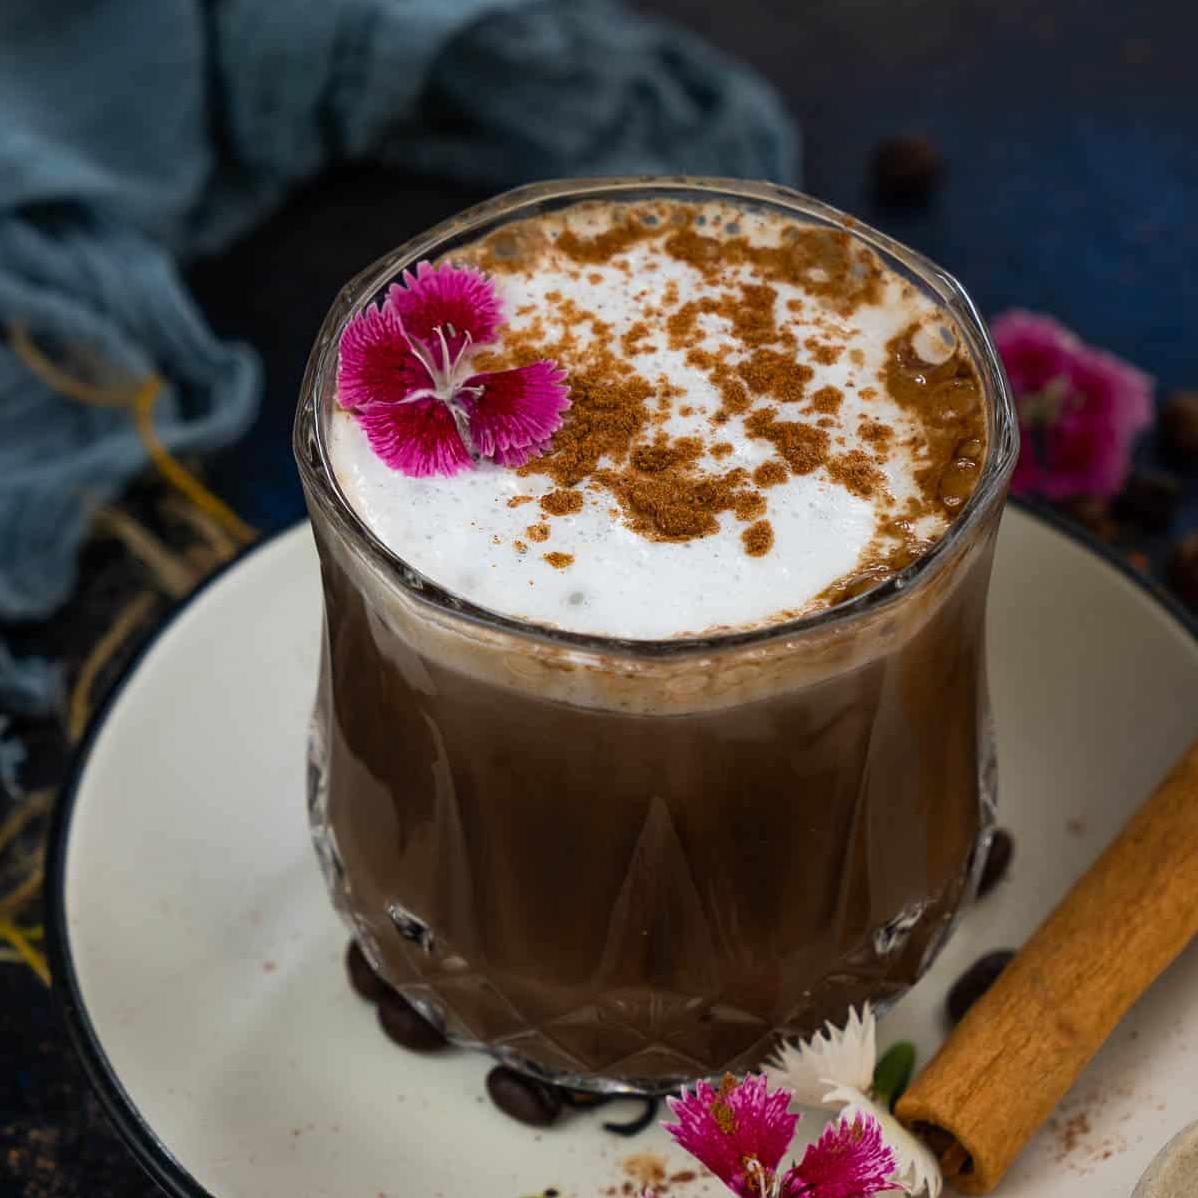  This frothy beverage is the perfect balance between sweet and spicy.